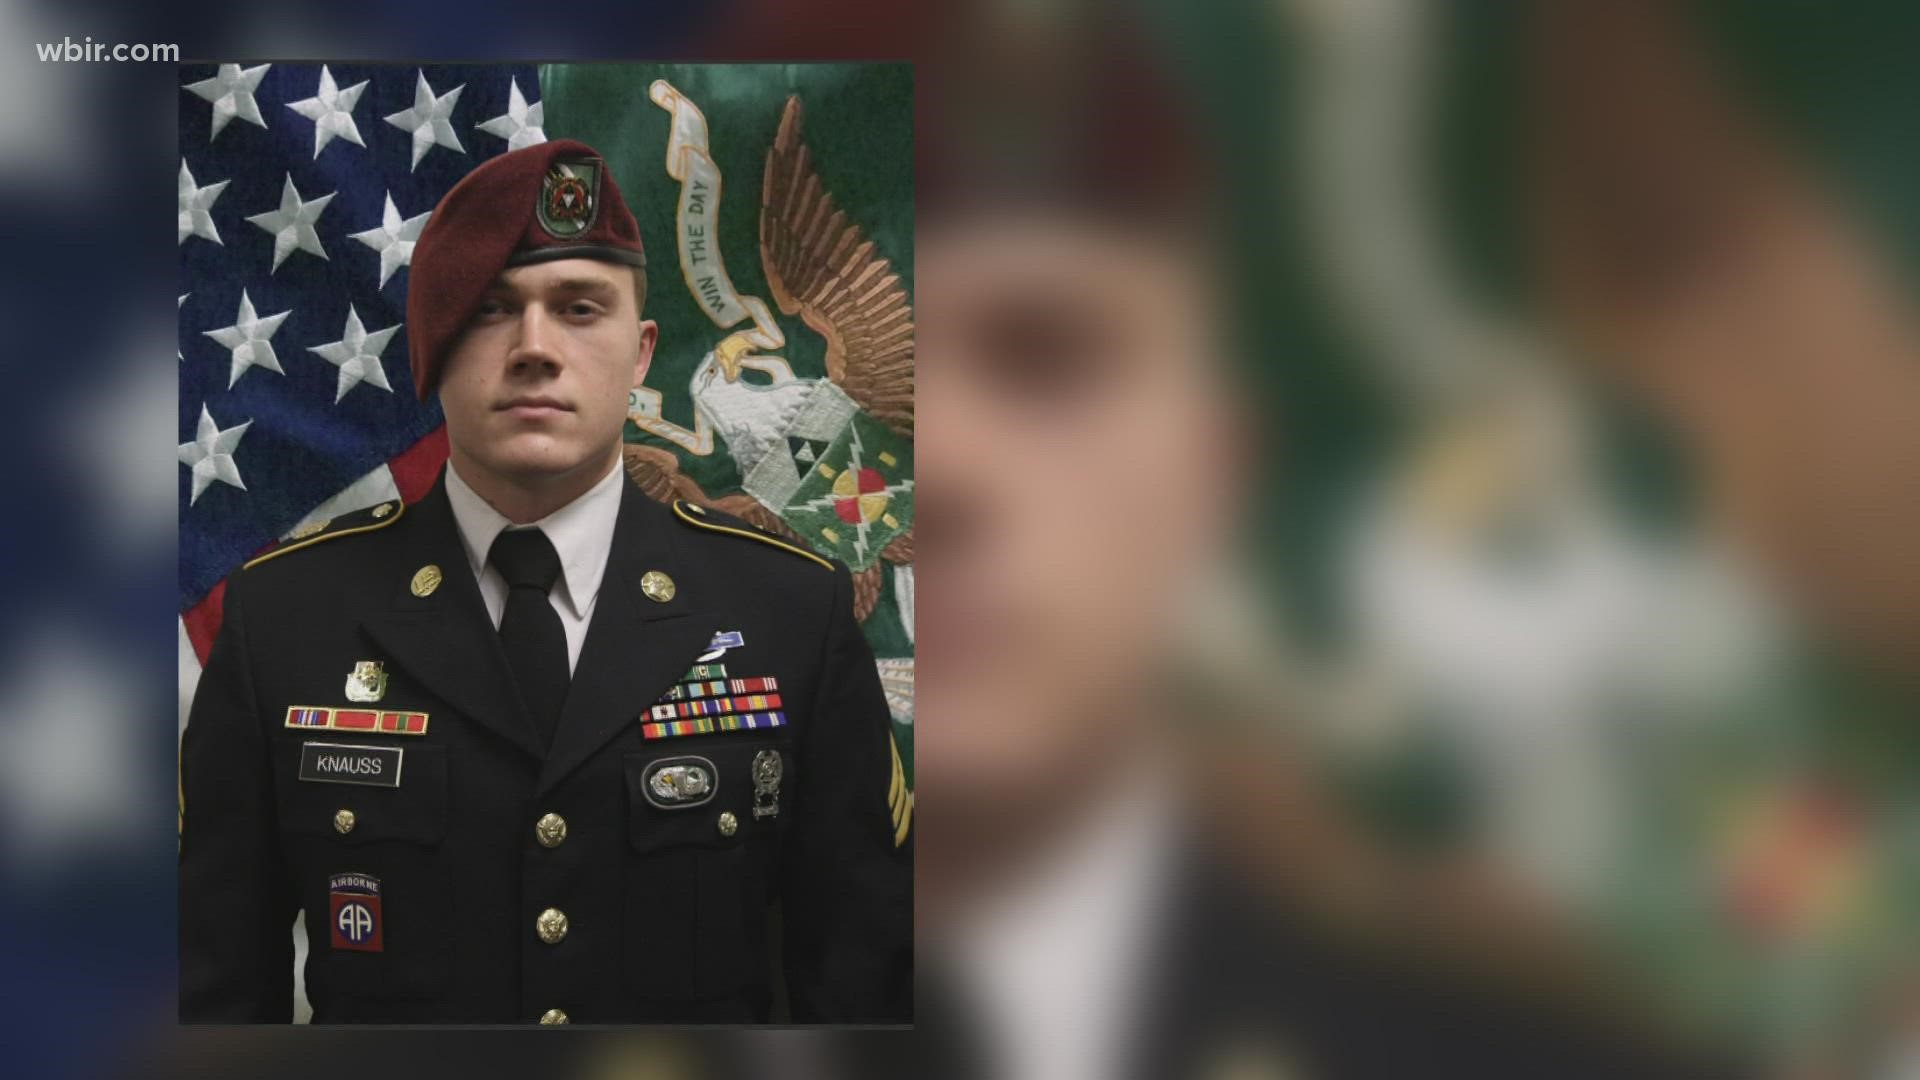 Staff Sgt. Ryan C. Knauss was one of 13 U.S. servicemembers who died in an explosion outside the Kabul, Afghanistan airport on Thursday.